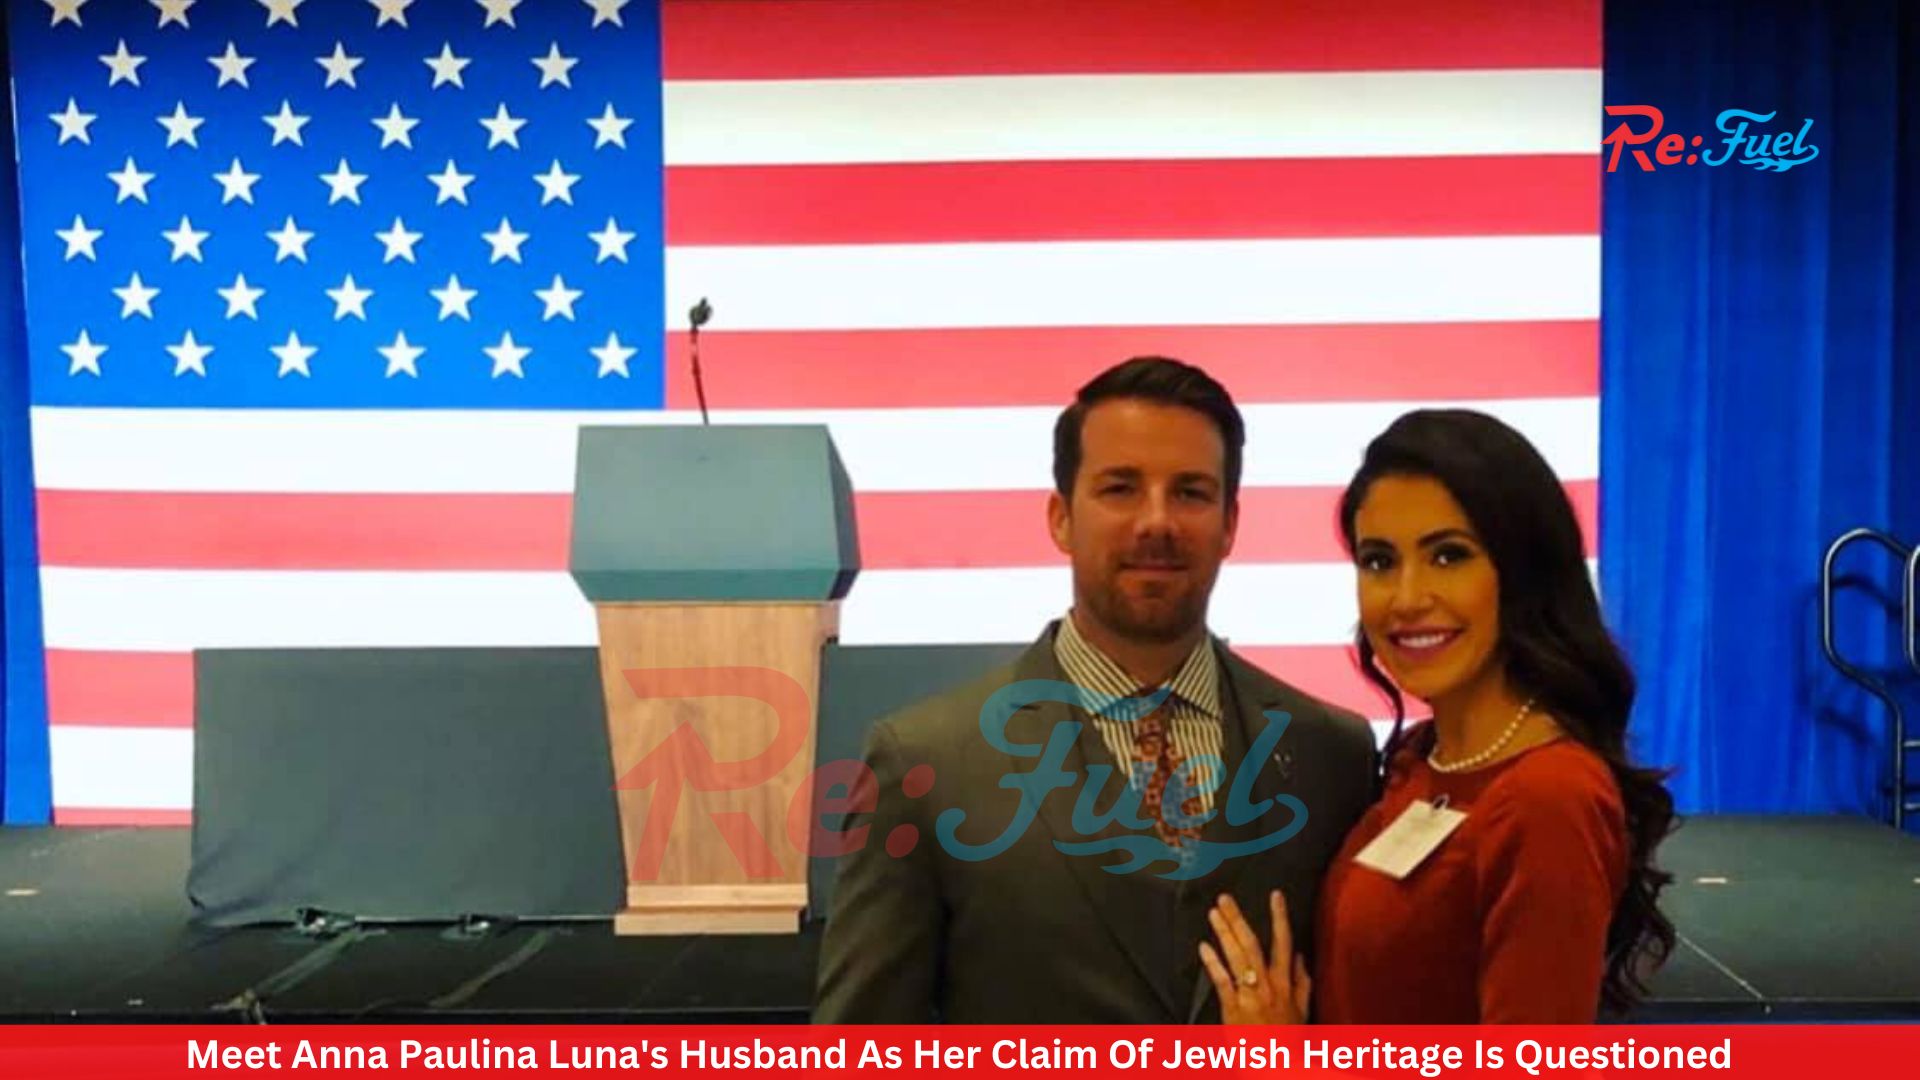 Meet Anna Paulina Luna's Husband As Her Claim Of Jewish Heritage Is Questioned